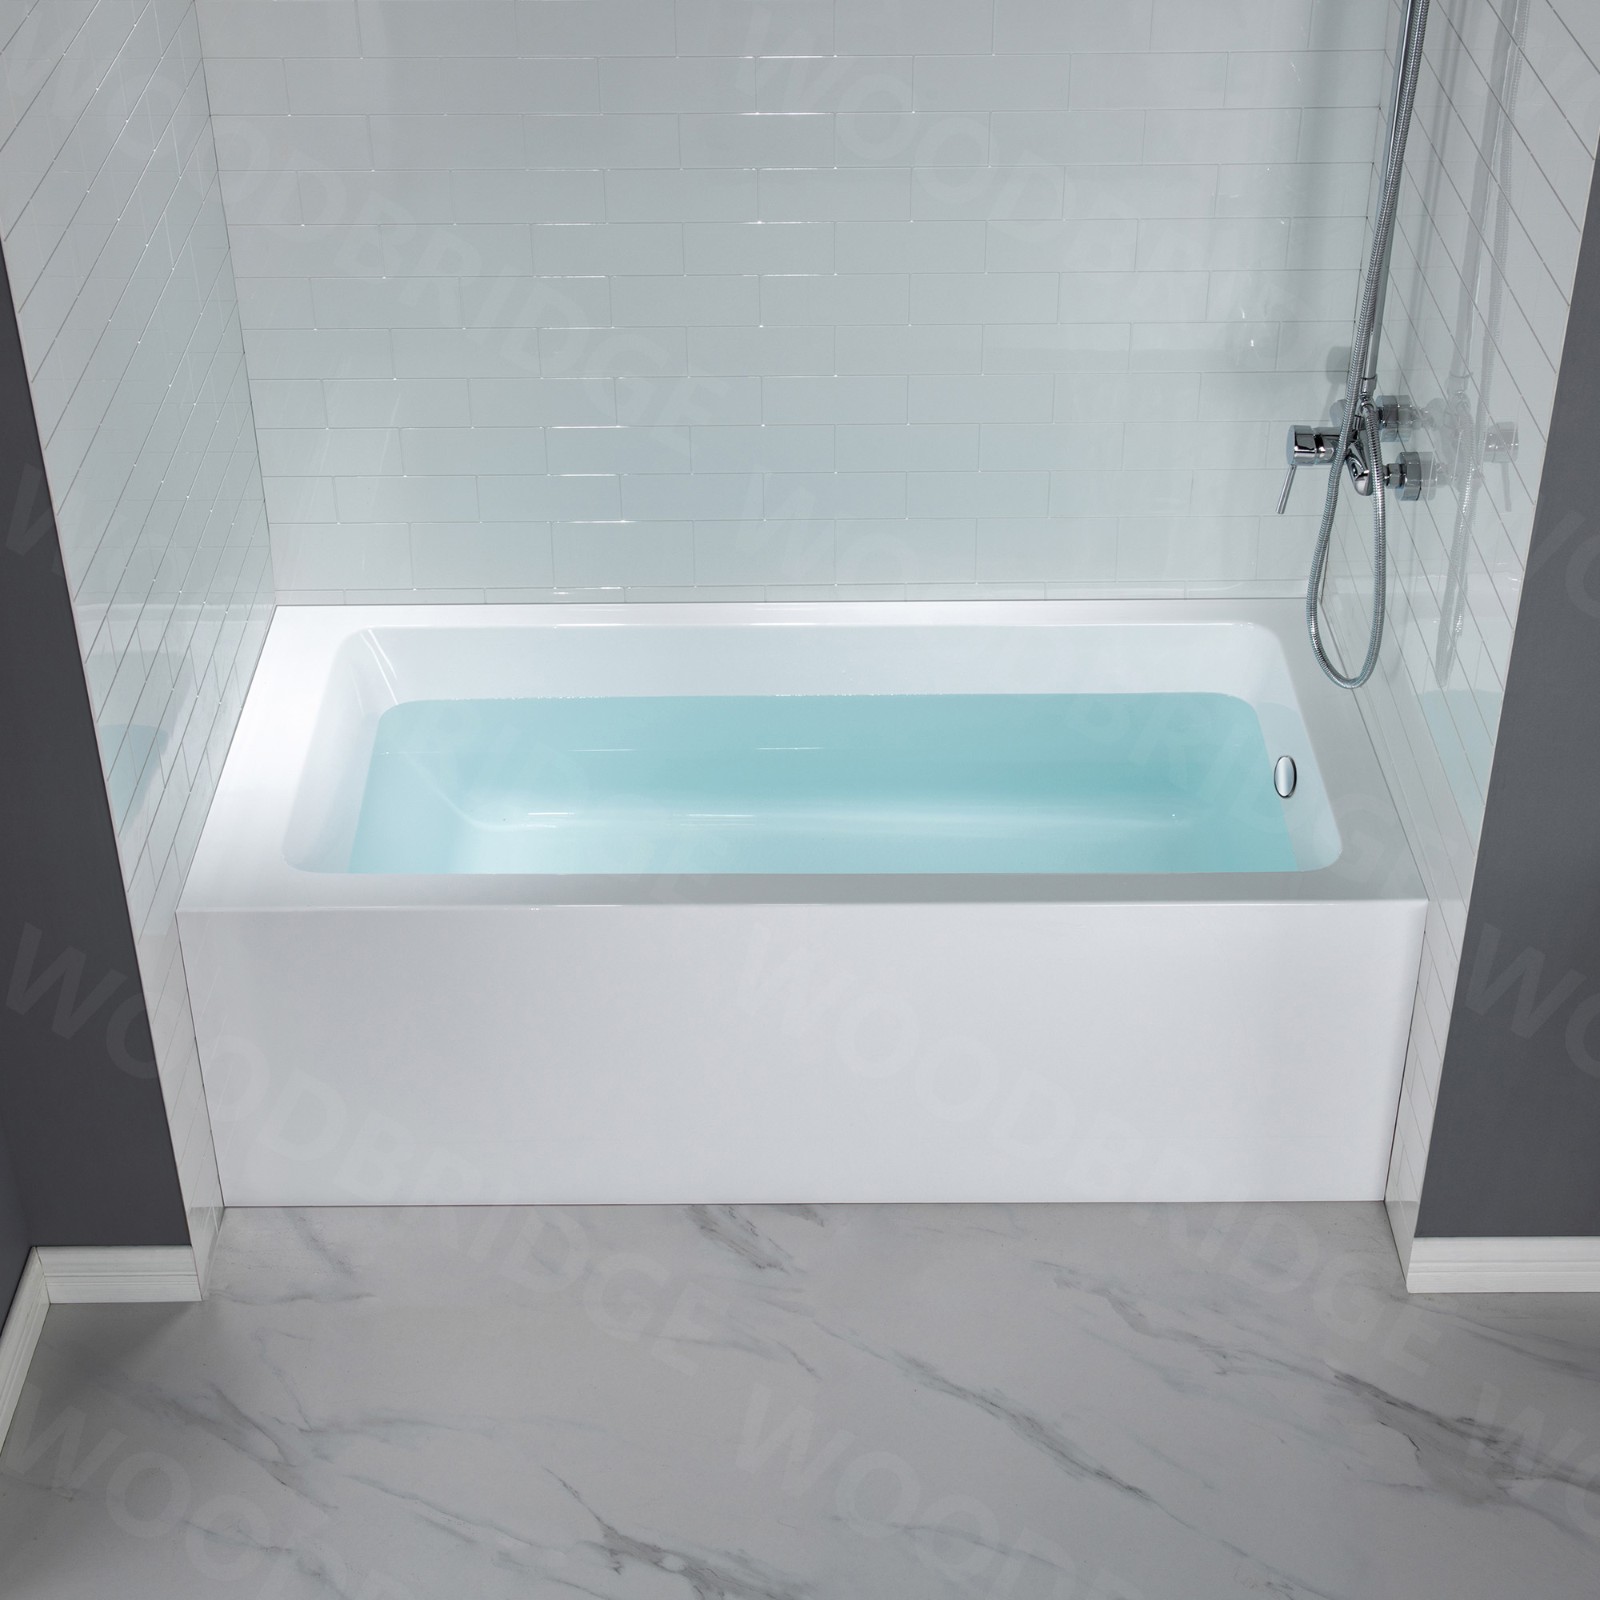  WOODBRIDGE 60-Inch Contemporary Alcove Acrylic Bathtub with Right Hand Drain and Overflow Holes, White_9582